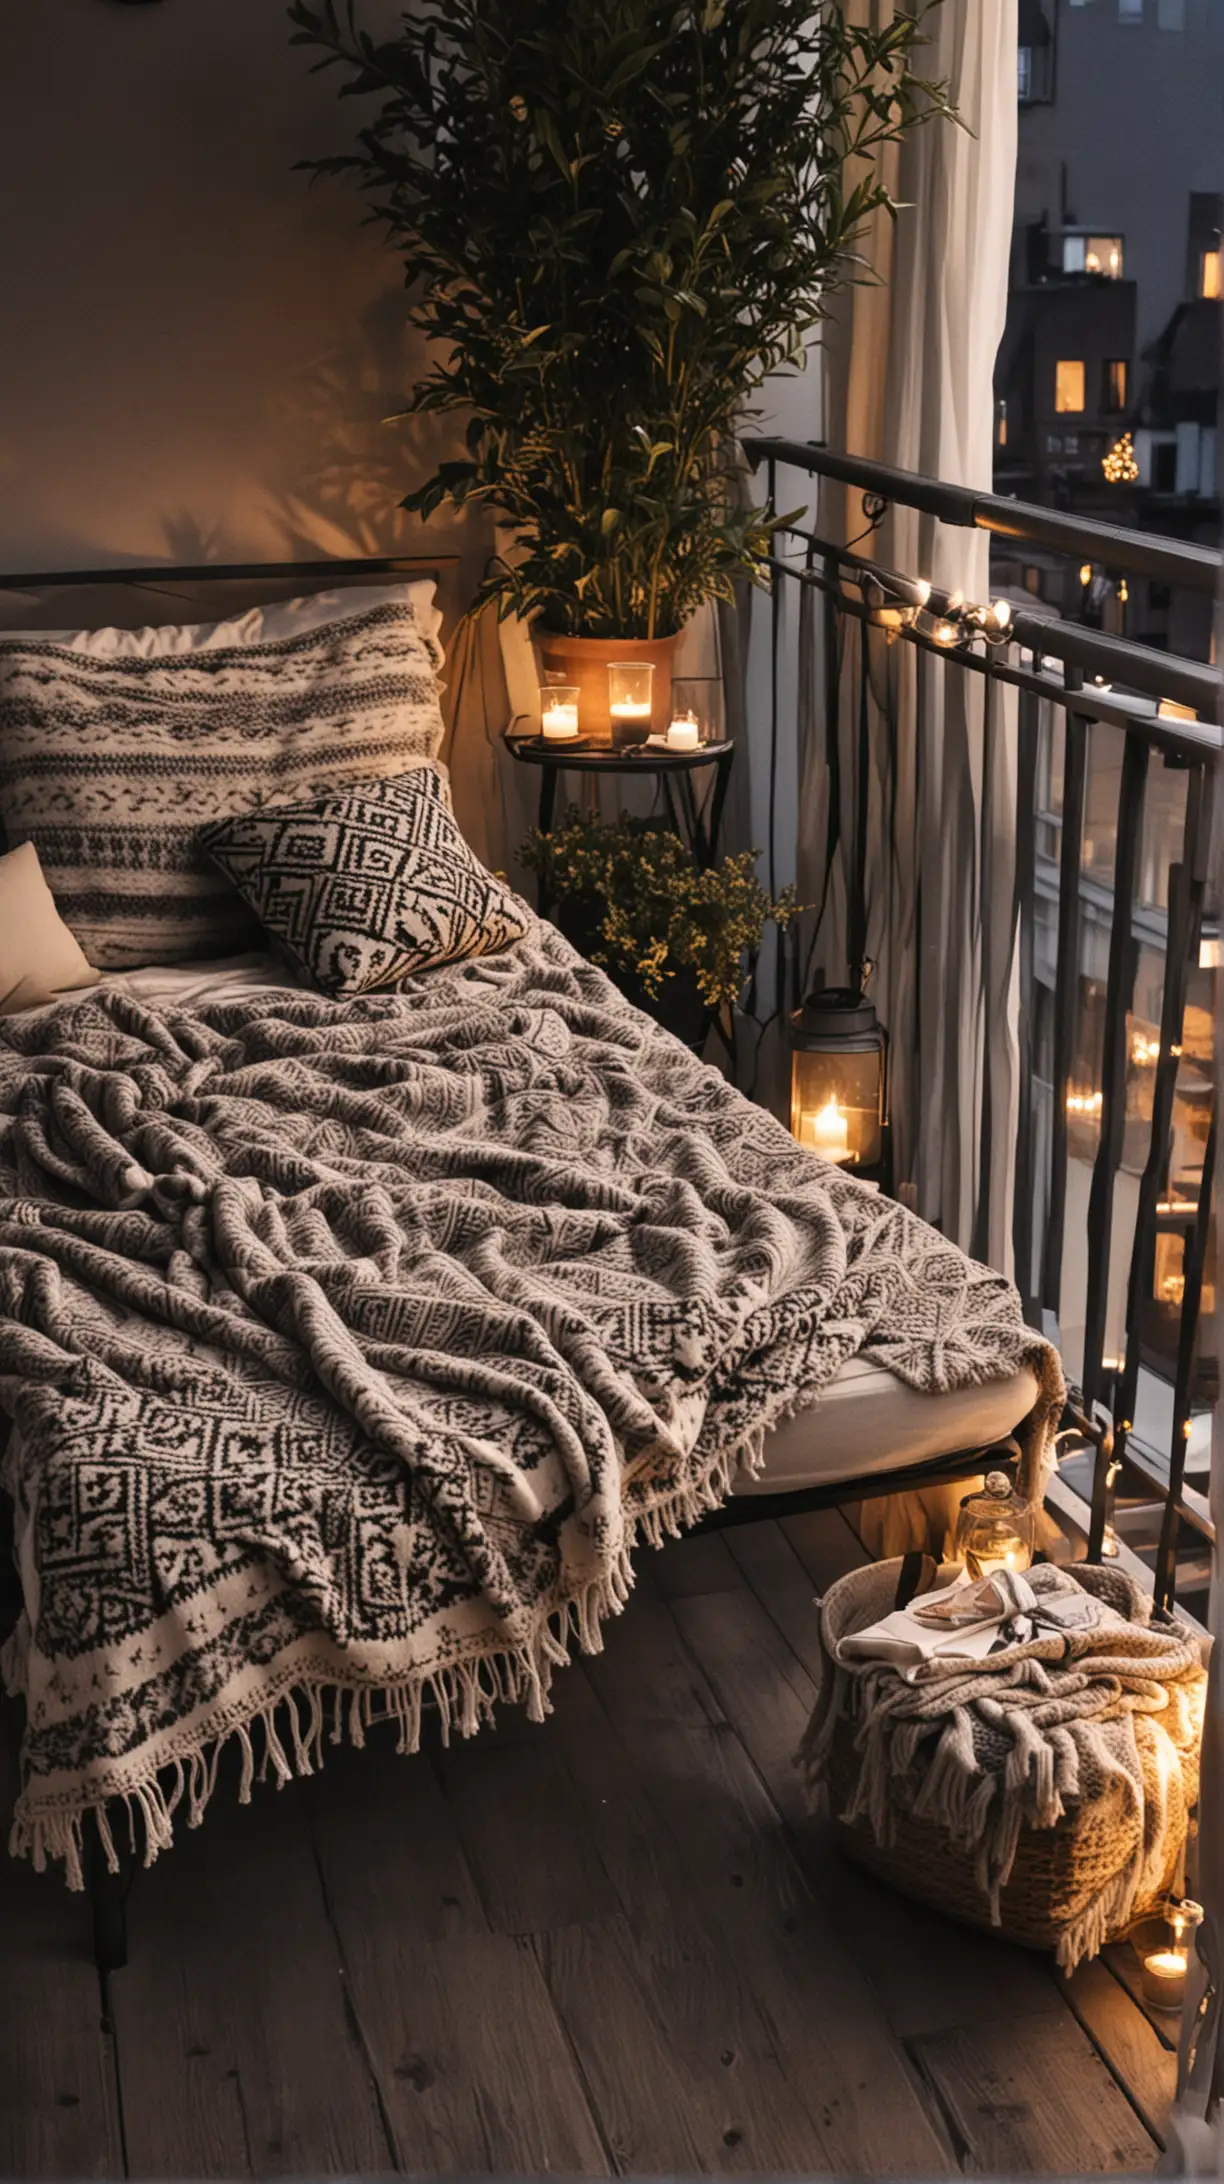 Cozy Balcony Evening with Layered Blankets for Chilly Nights